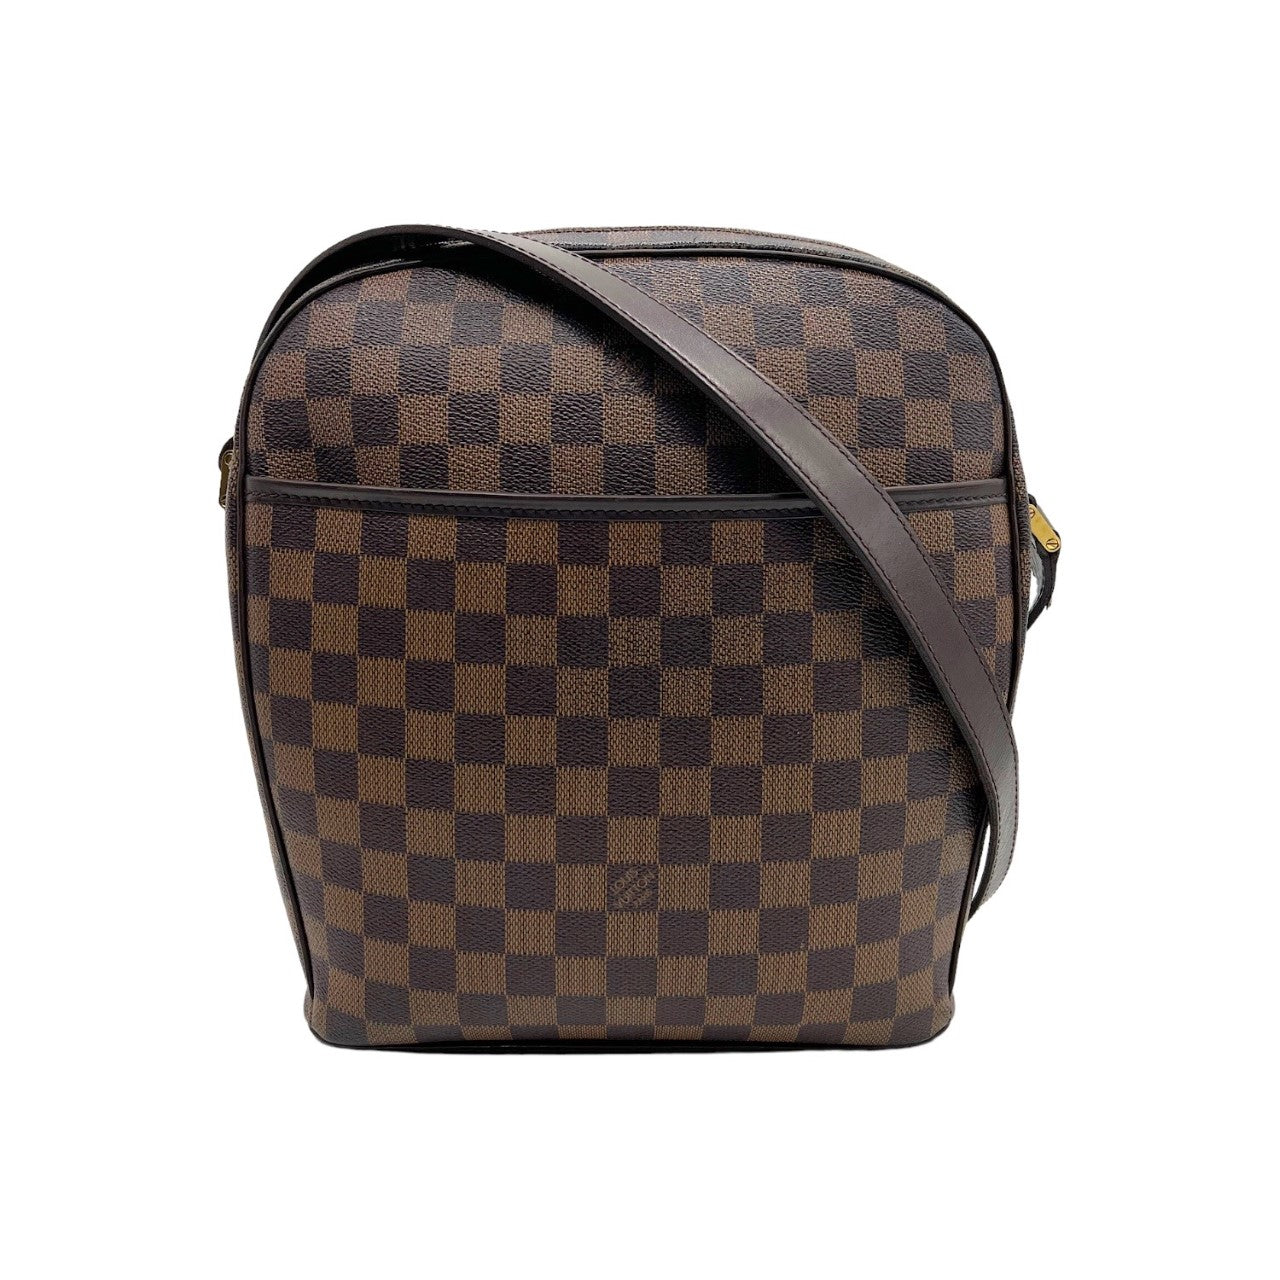 ON SALE* LOUIS VUITTON #37168 Damier Ebene Ipanema GM – ALL YOUR BLISS